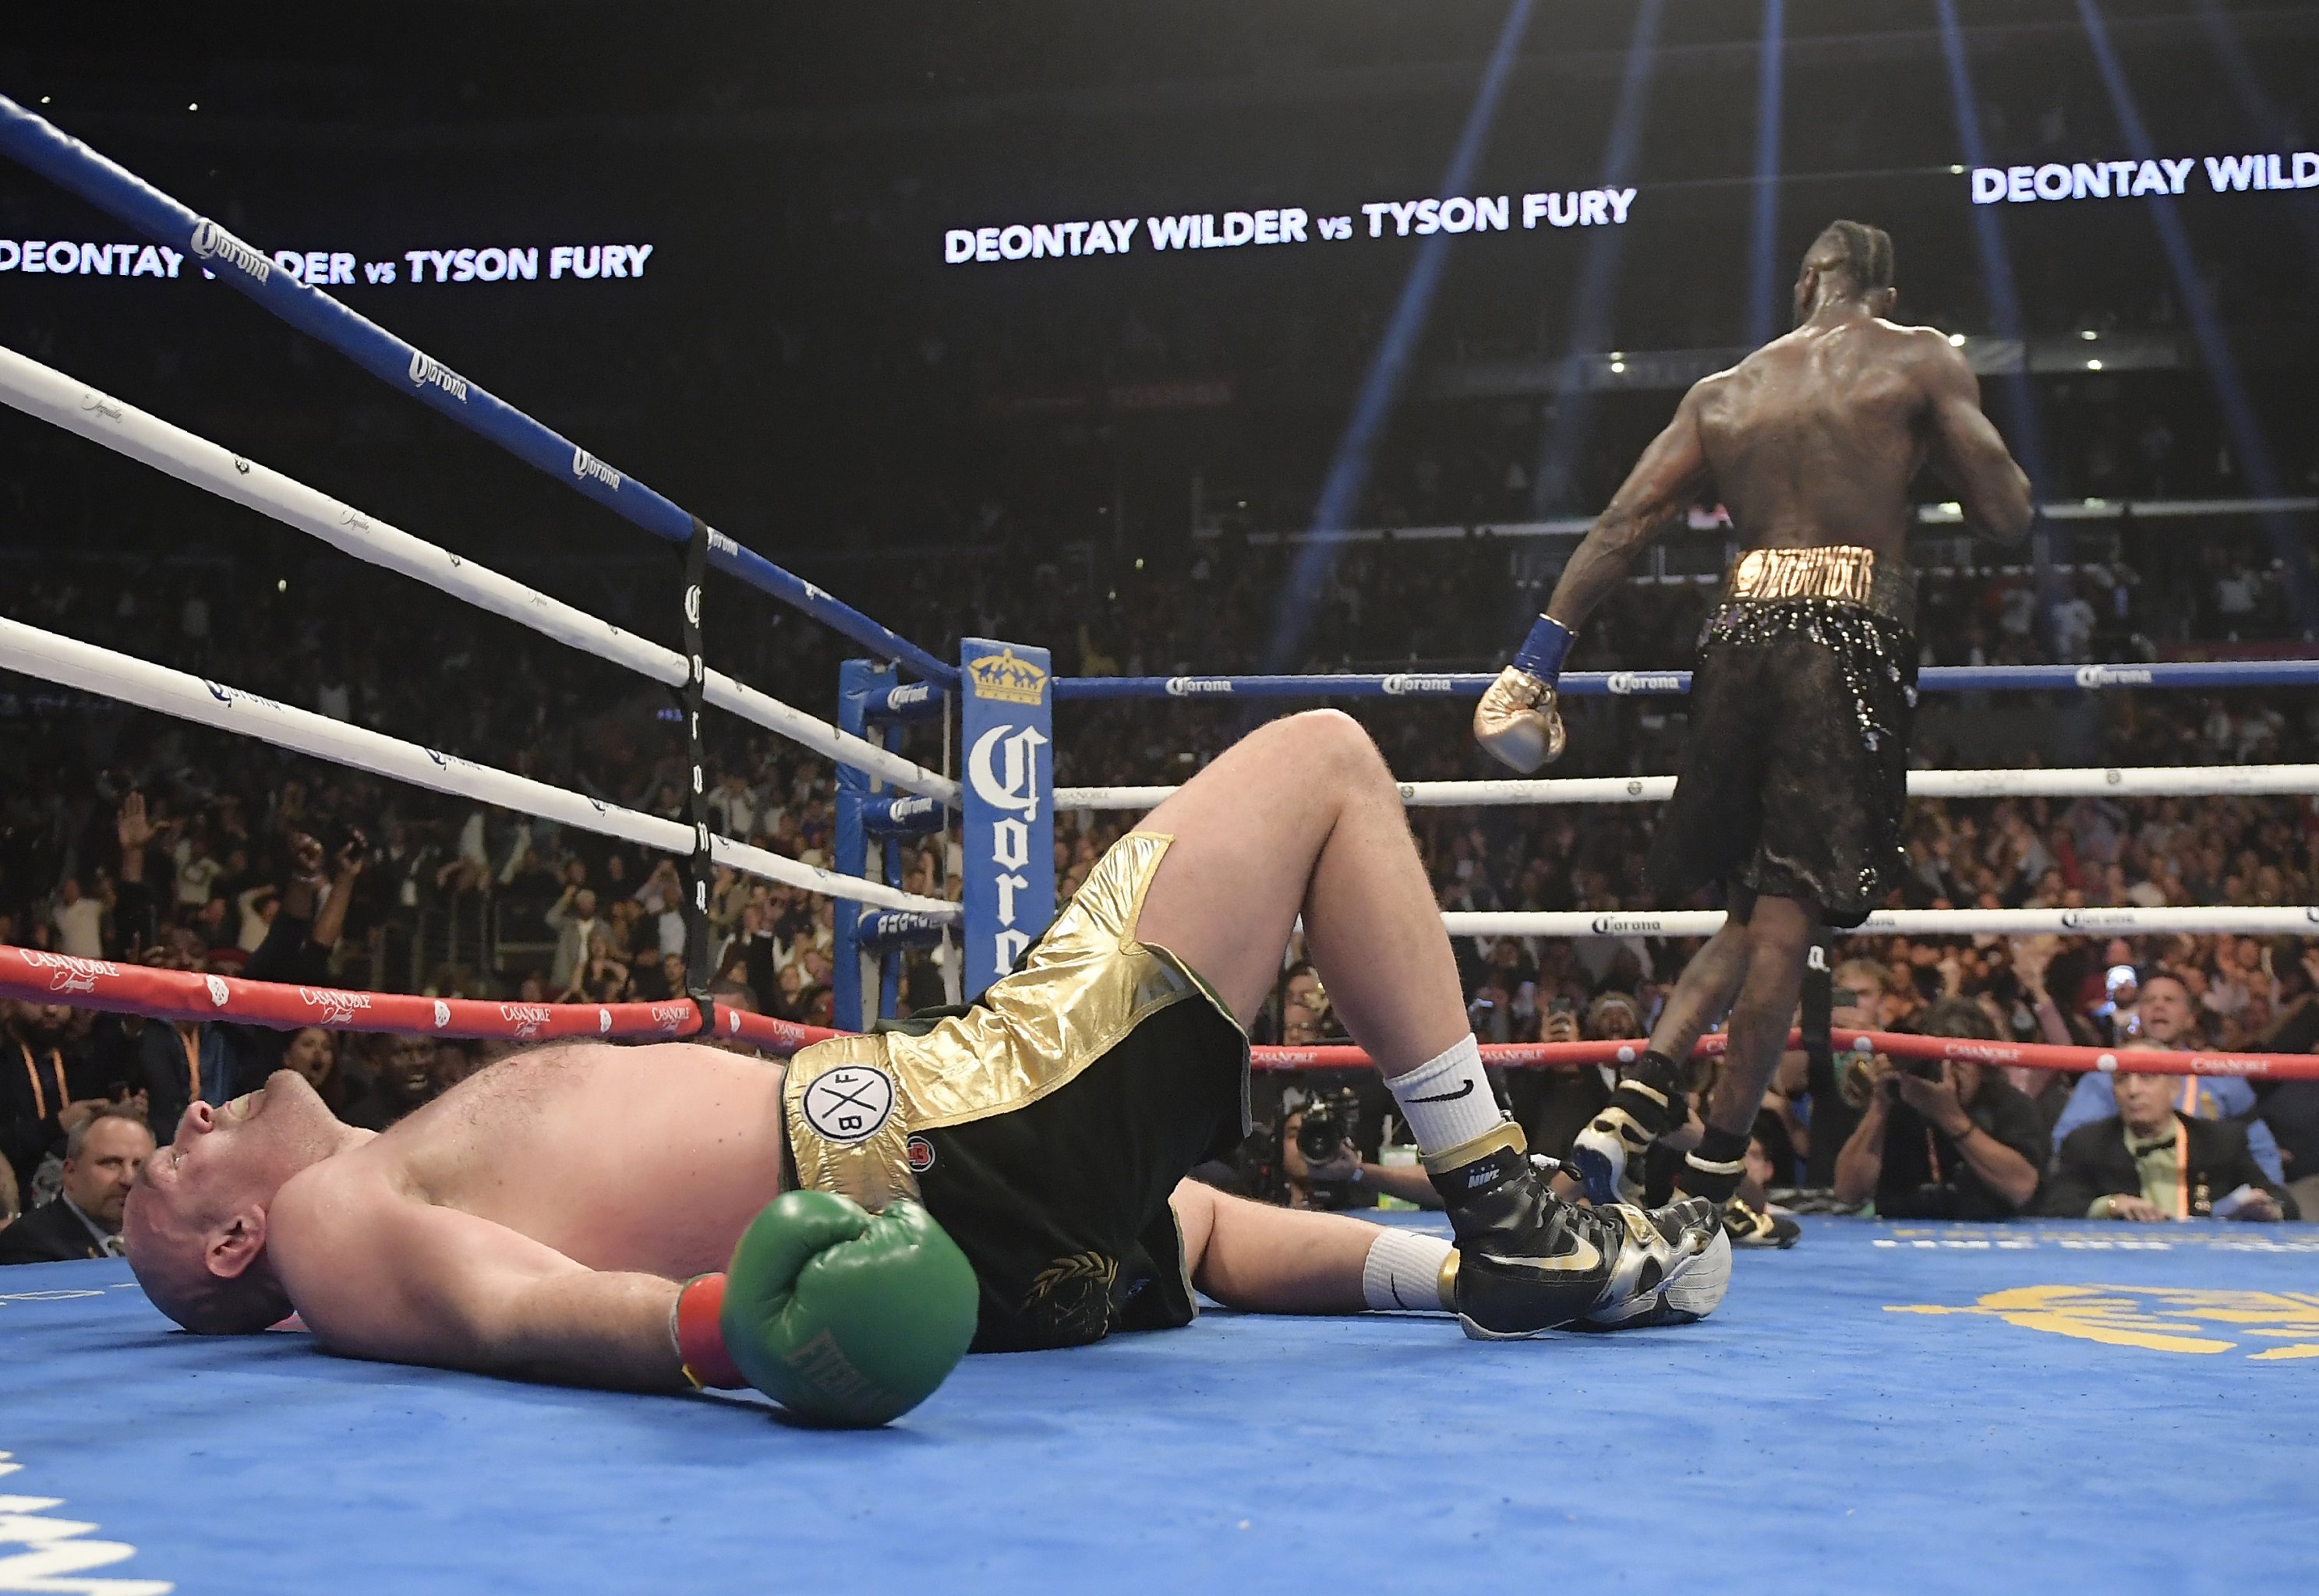 Deontay Wilder-Tyson Fury 2: B/R Staff Fight Predictions | Bleacher Report | Latest News, Videos and Highlights